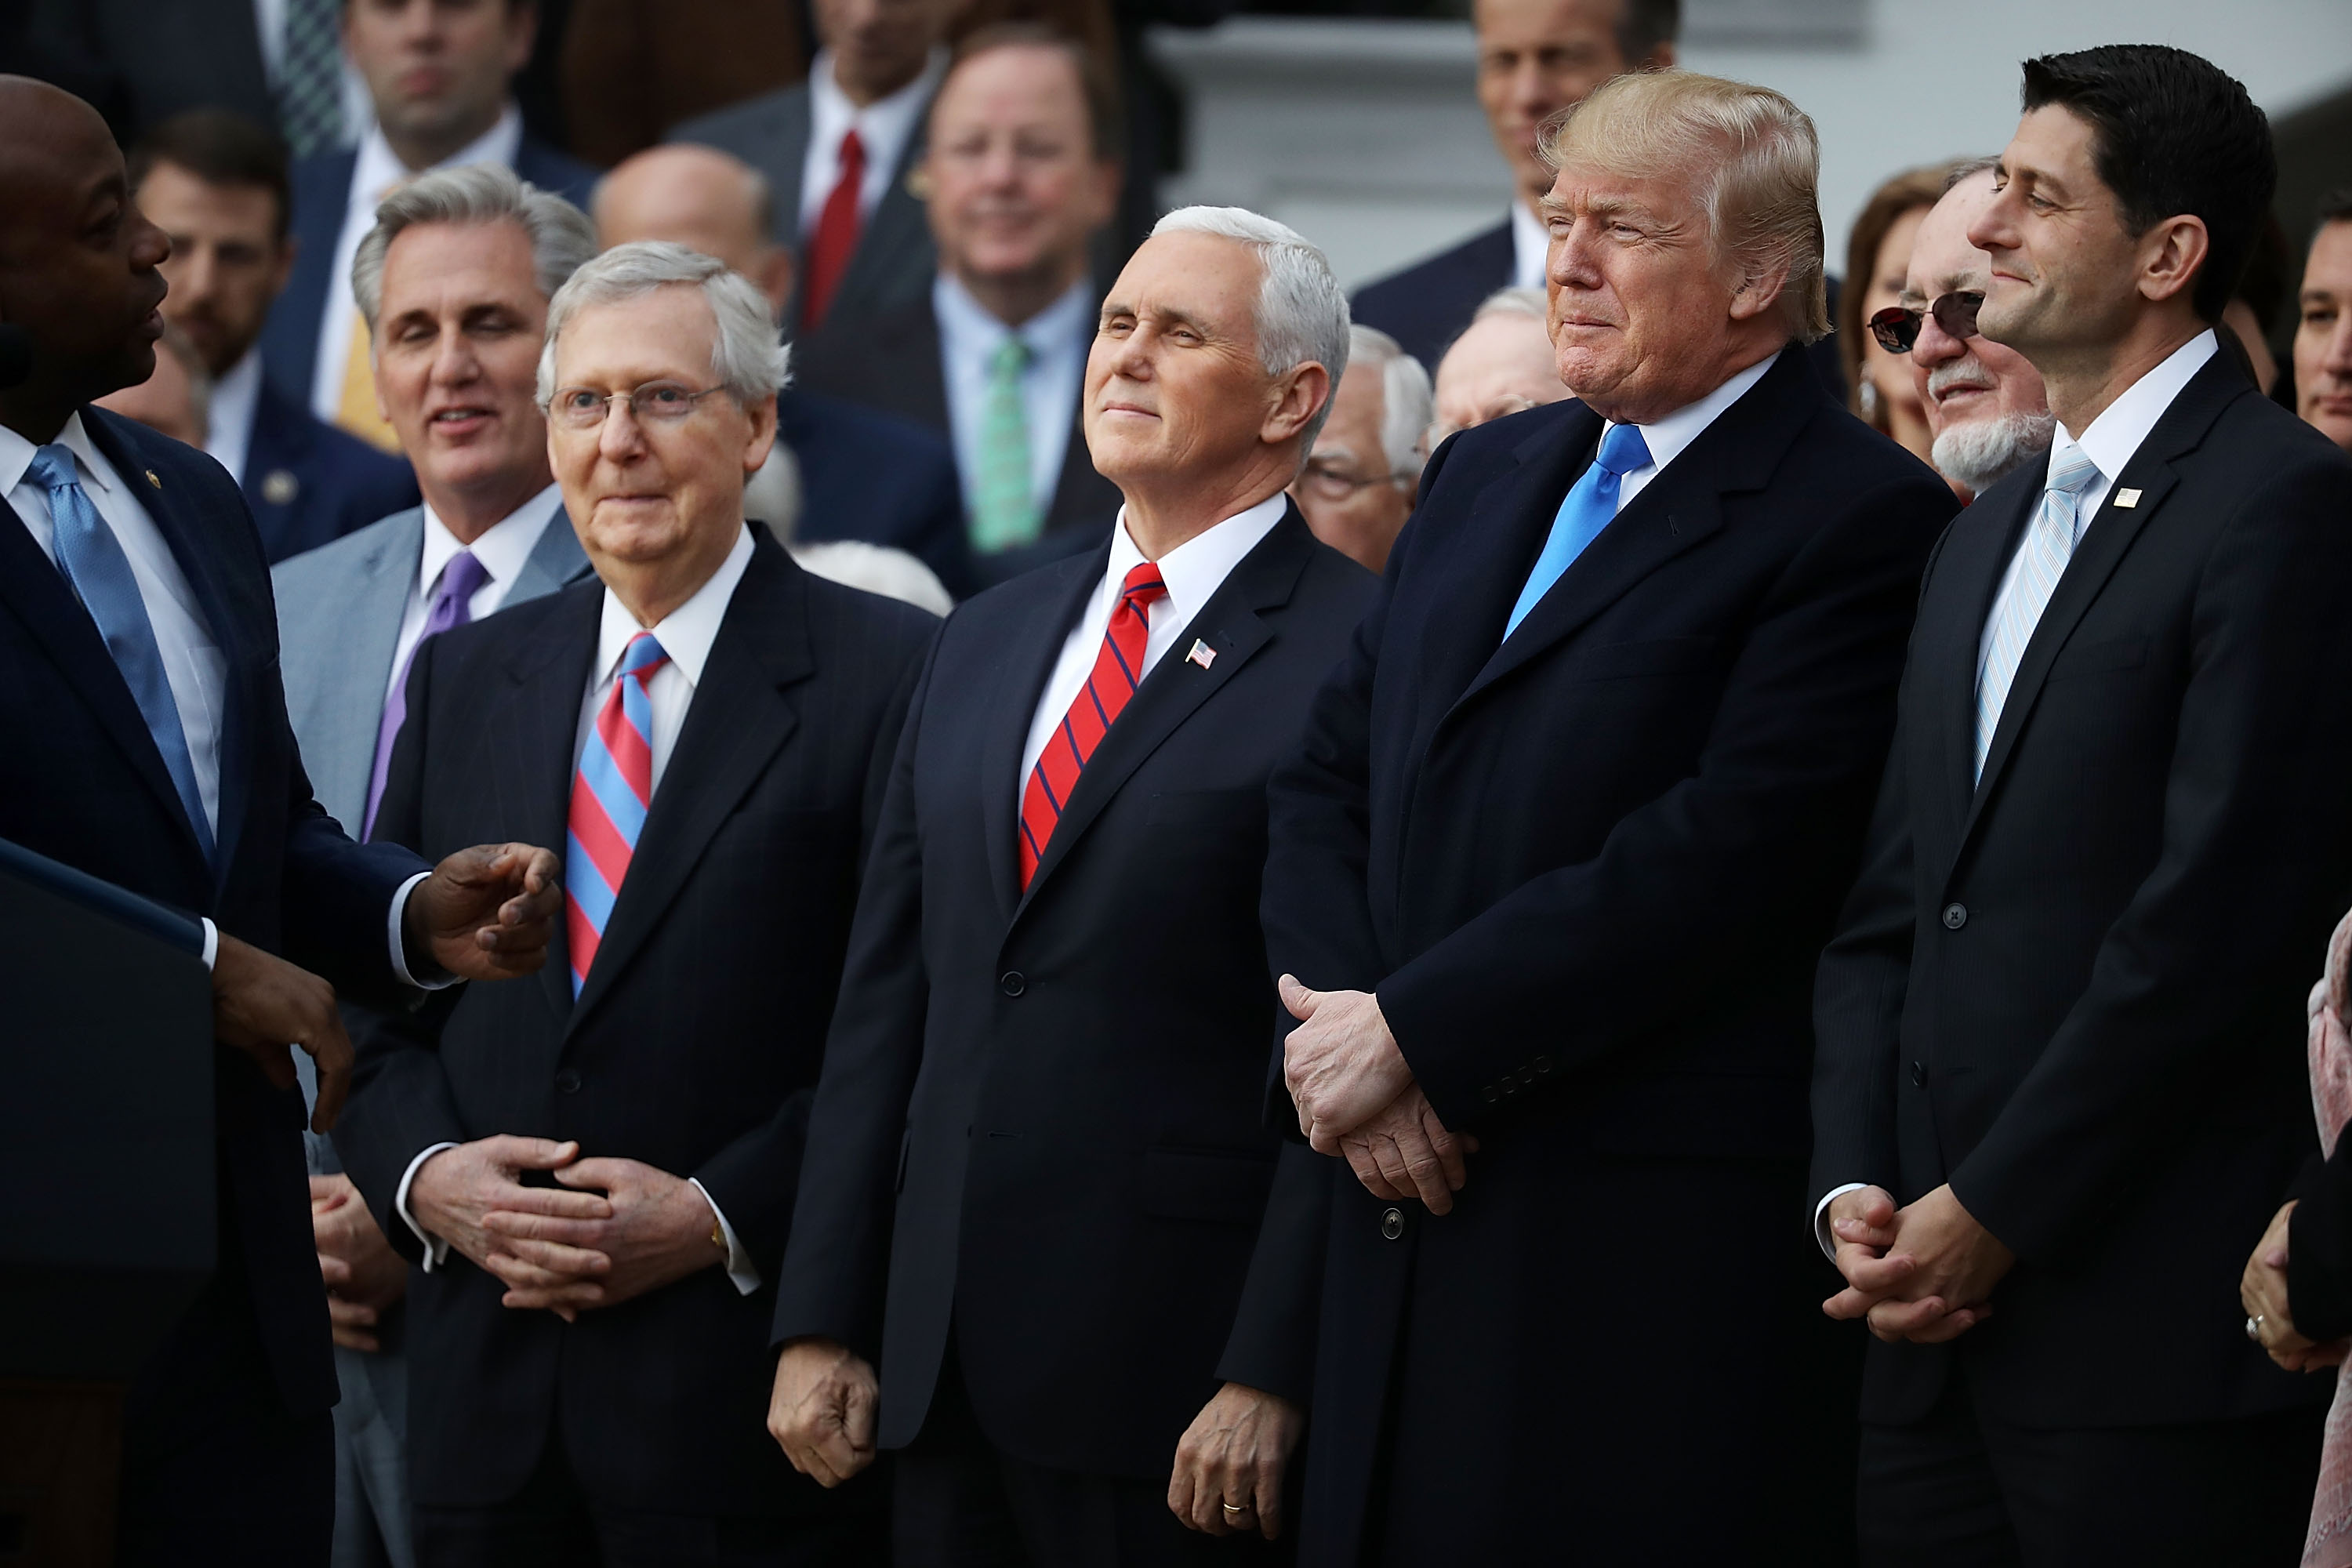 Sen. Tim Scott (R-SC) delivers remarks with House Majority Leader Kevin McCarthy (R-CA), Aenate Majority Leader Mitch McConnell (R-KY), Vice President Mike Pence, U.S. President Donald Trump and Speaker of the House Paul Ryan (R-WI) during an event celebrating the passage of the Tax Cuts and Jobs Act on the South Lawn of the White House December 20, 2017. (Chip Somodevilla—Getty Images)